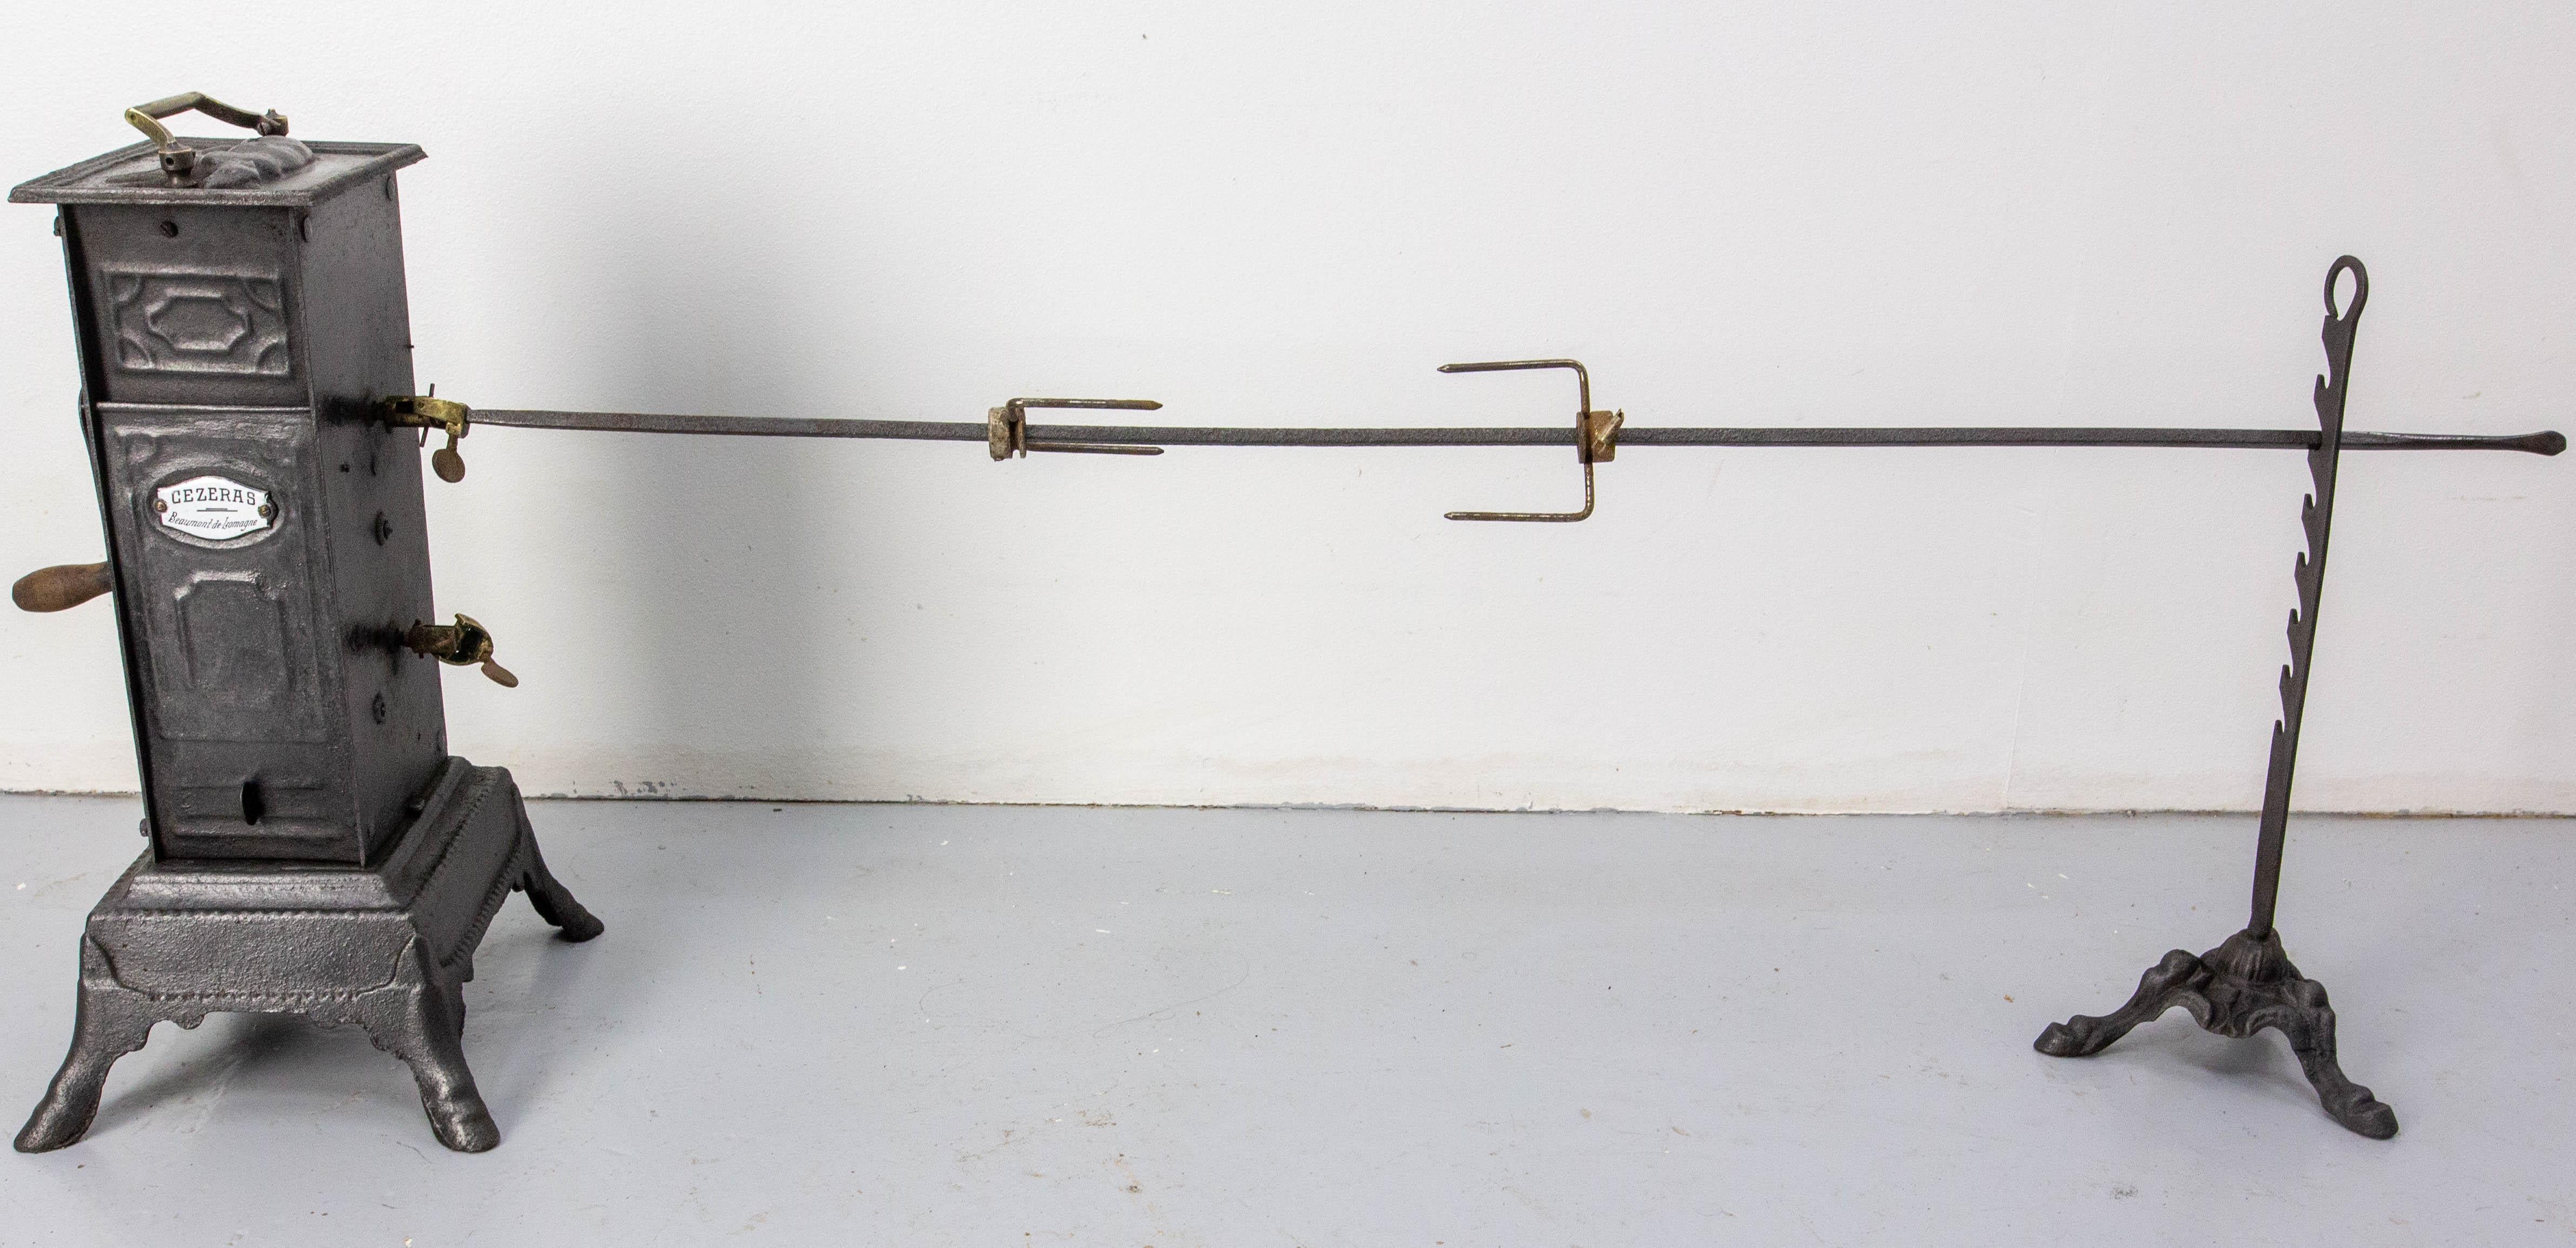 Ornate and functional 19th-century French cast-iron rotisserie.
It consists of a winding jack resting on four claw feet, a handle, a winding key, 2 positions for the spit from the rotisserie, a cast-iron tripod spit with 7 spit hooks and a ring on